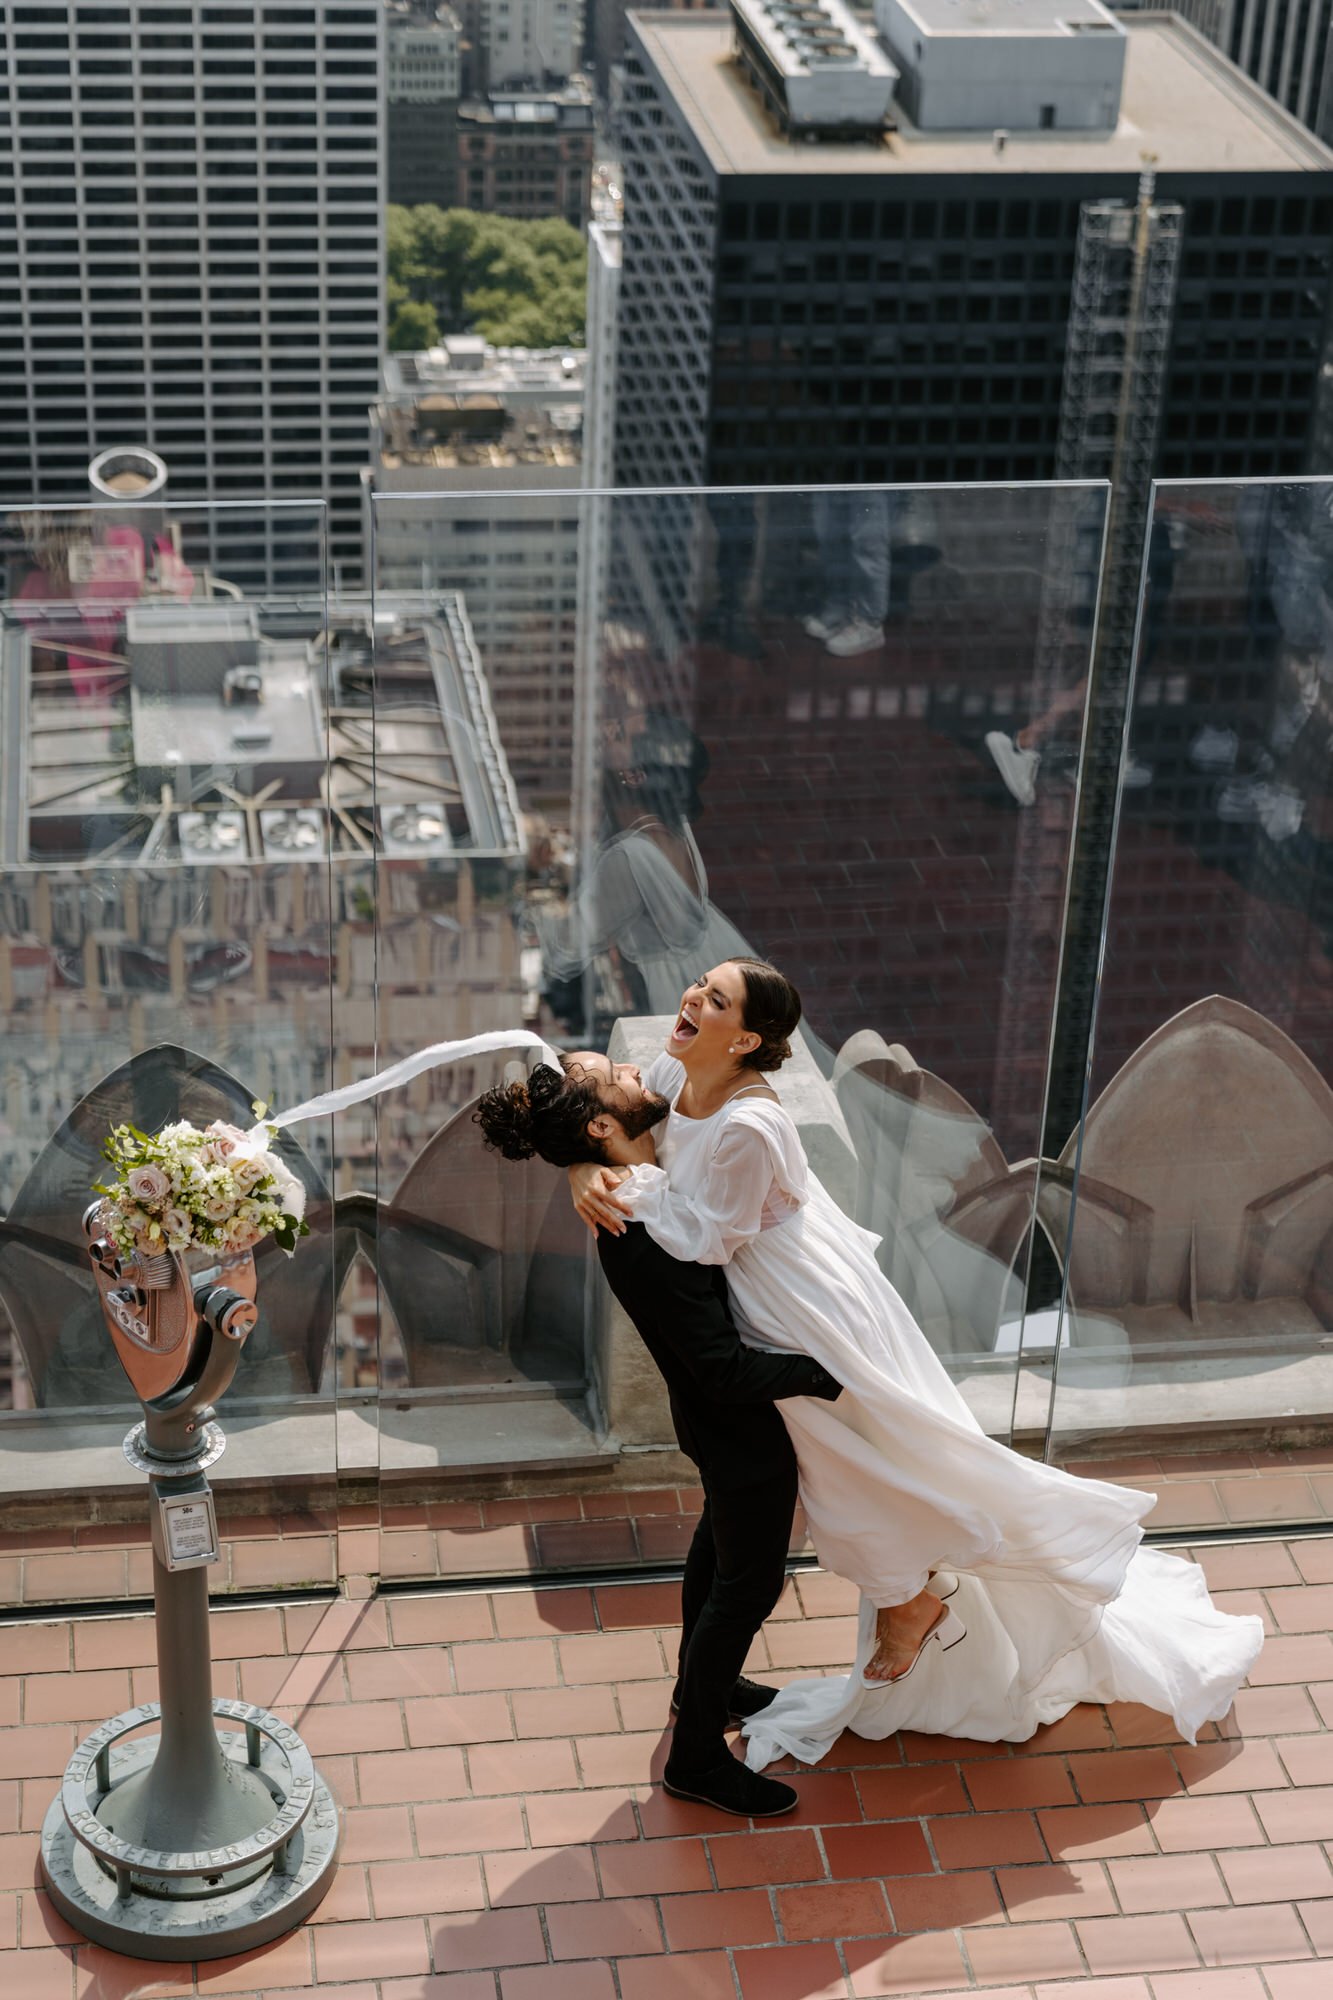 NYC-Top-of-The-Rock-Elopement-NYC-Photographer-Steph-Powell-Creative-31.jpg